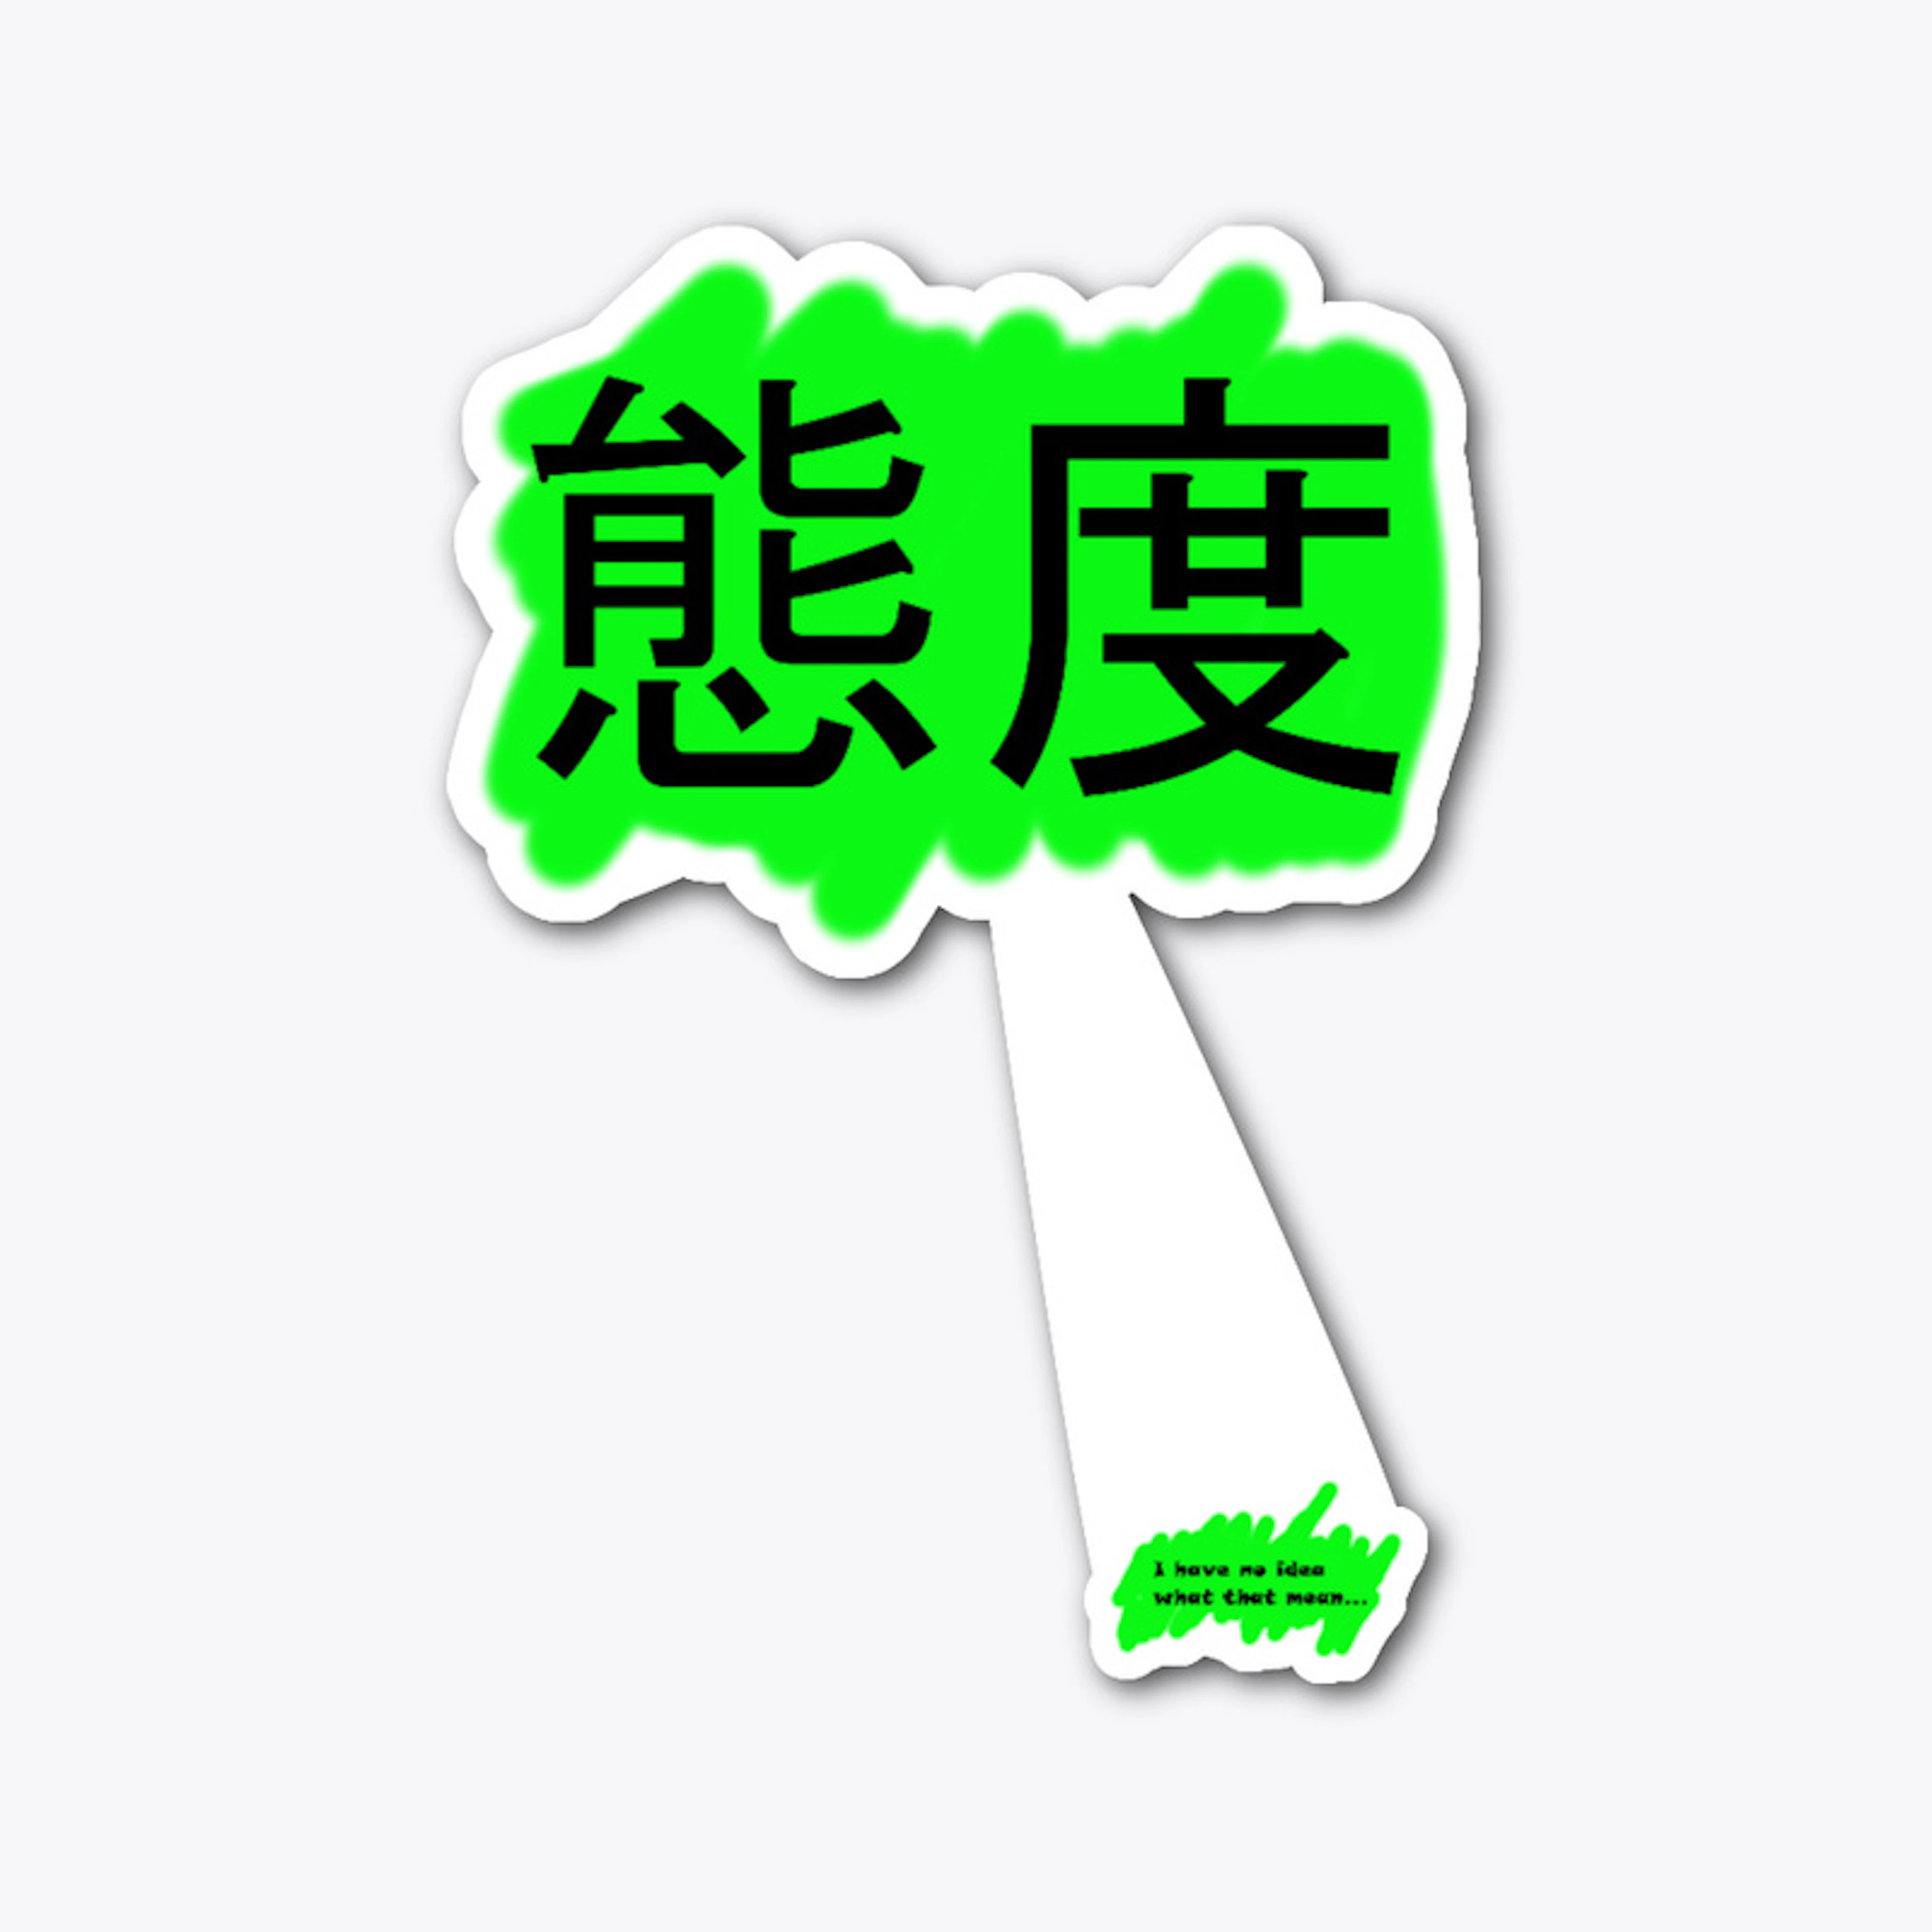 Attitude in chinese